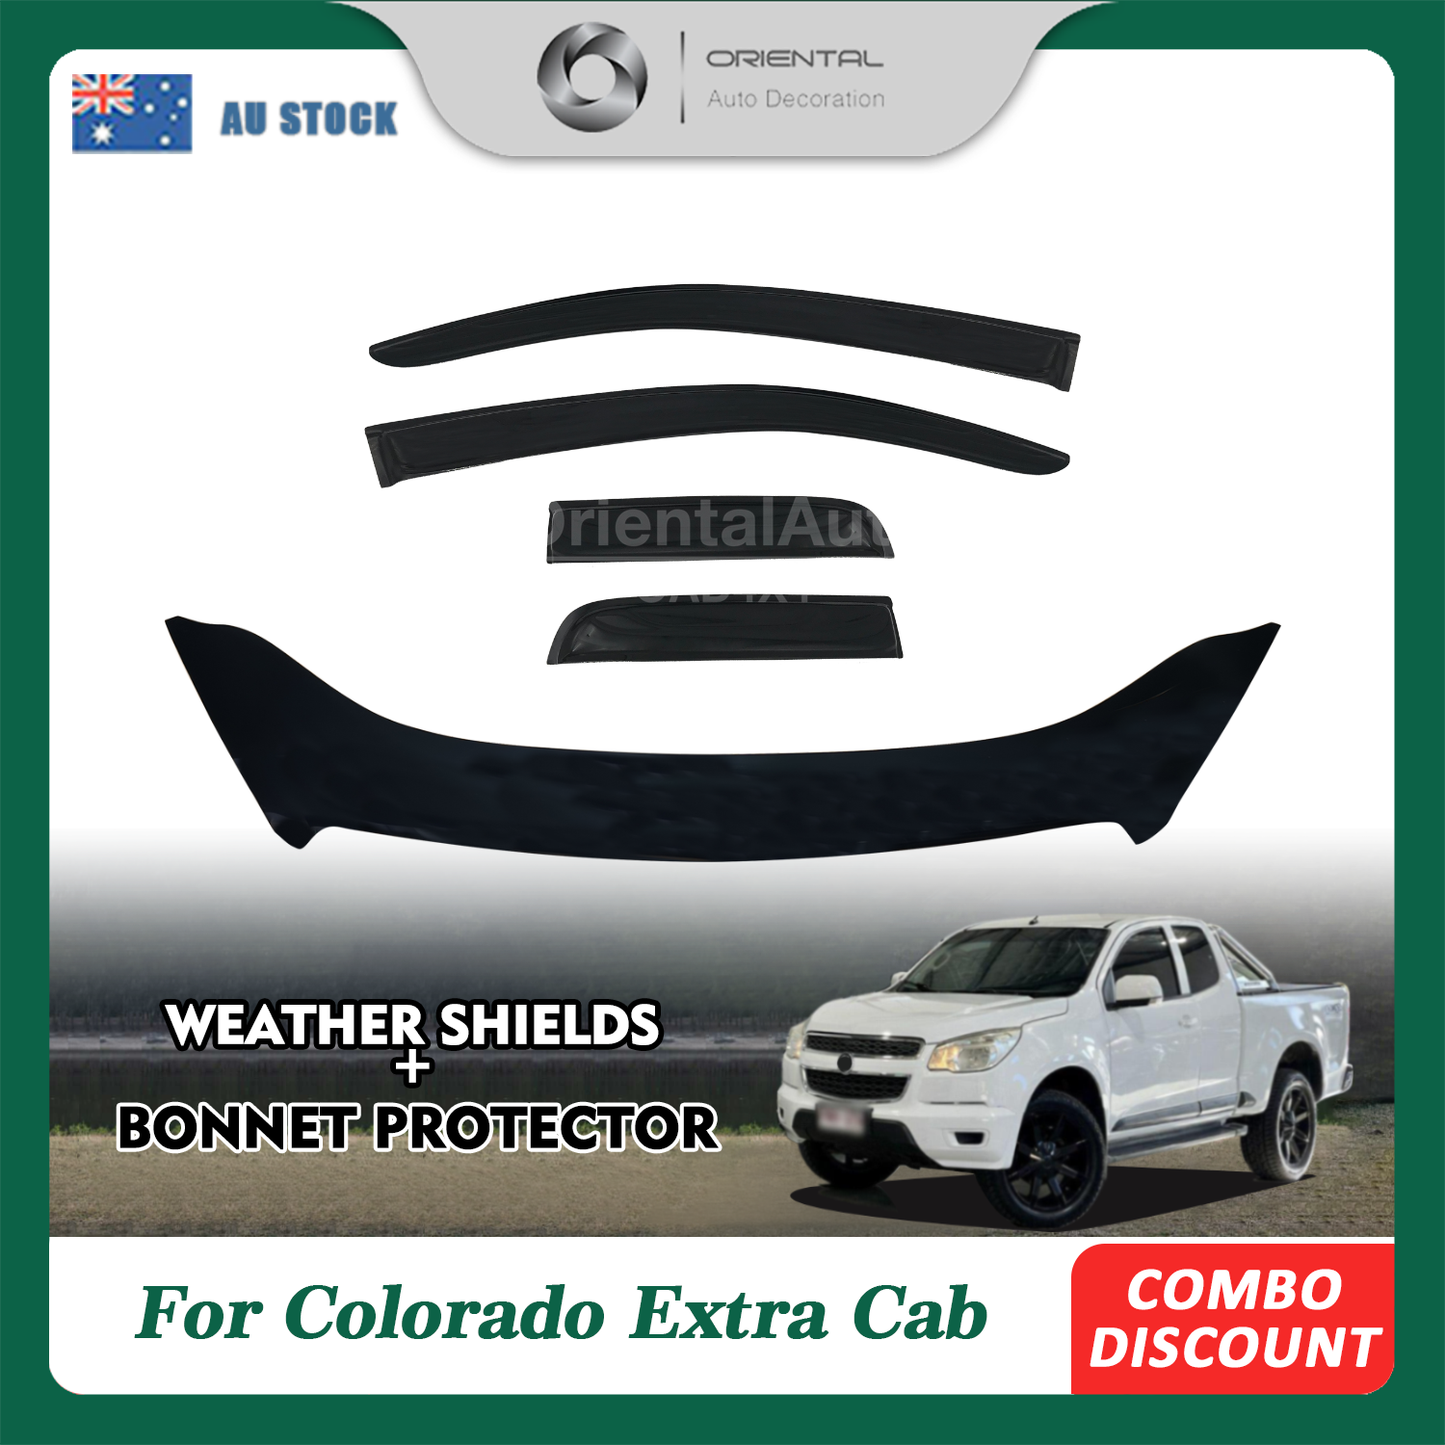 Bonnet Protector & Luxury Weathershields Weather Shields Window Visors For Holden Colorado RG Series Extra Cab 2012-2016